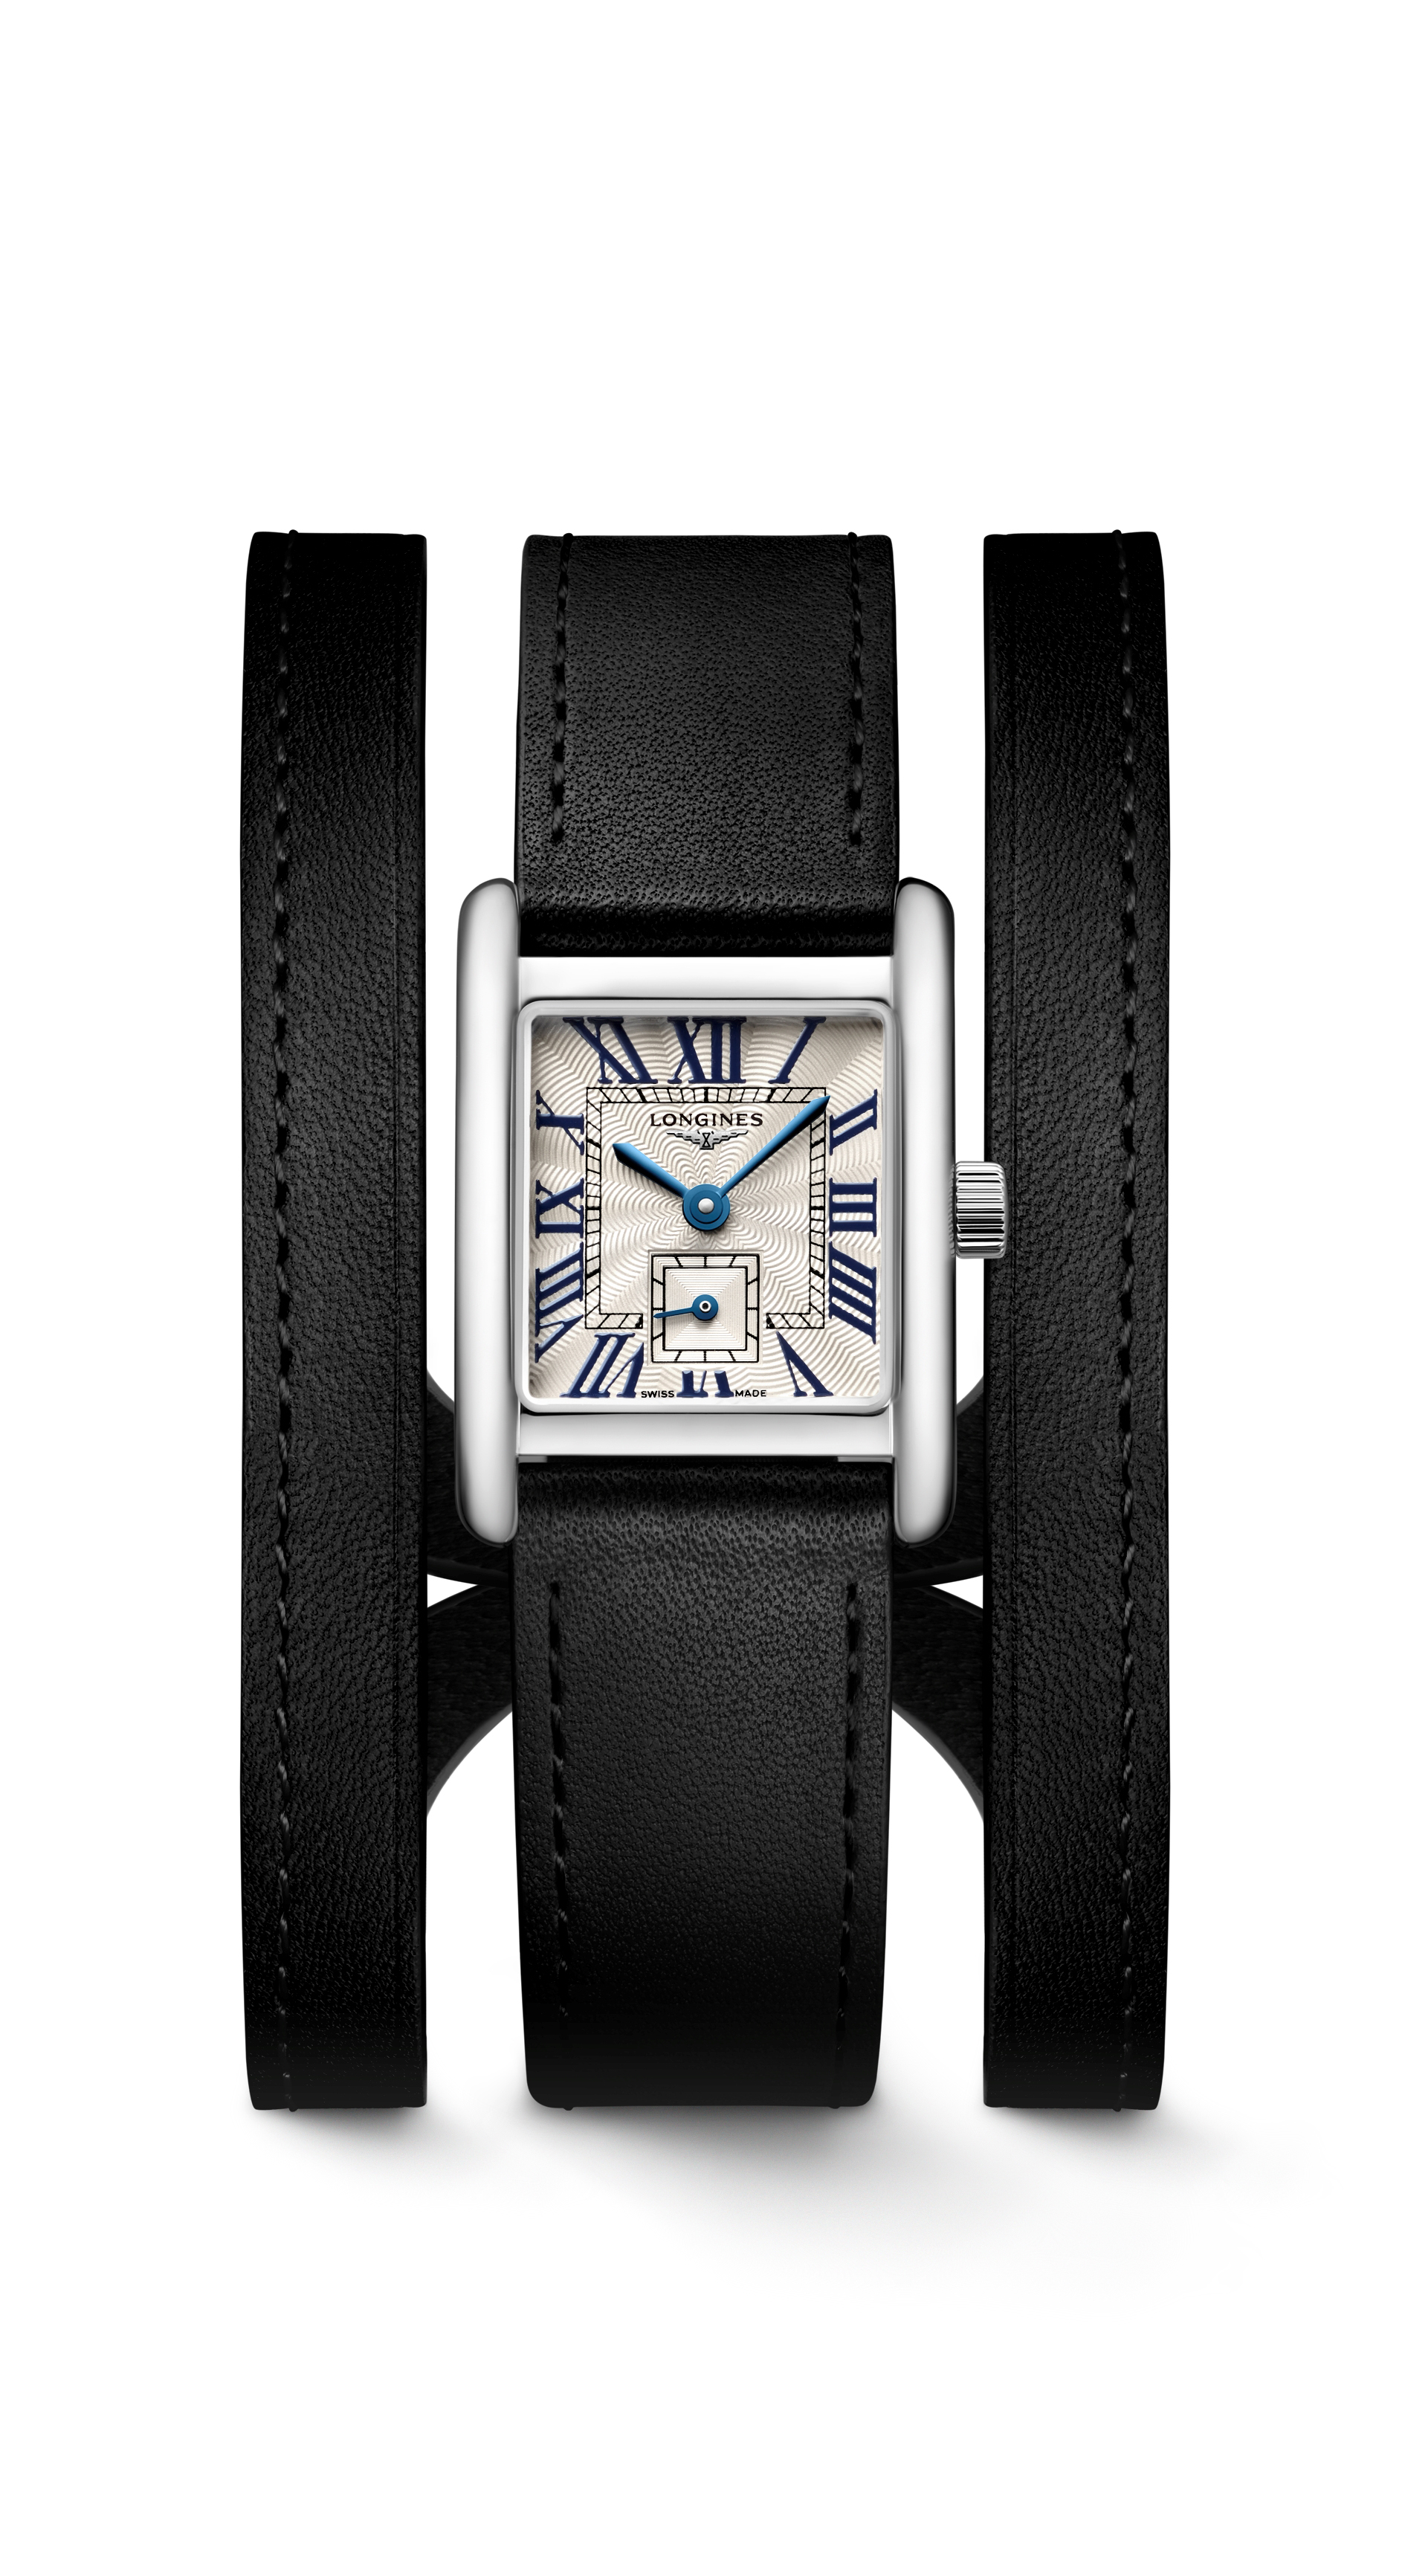 Longines mini dolcevita watch with black double straps